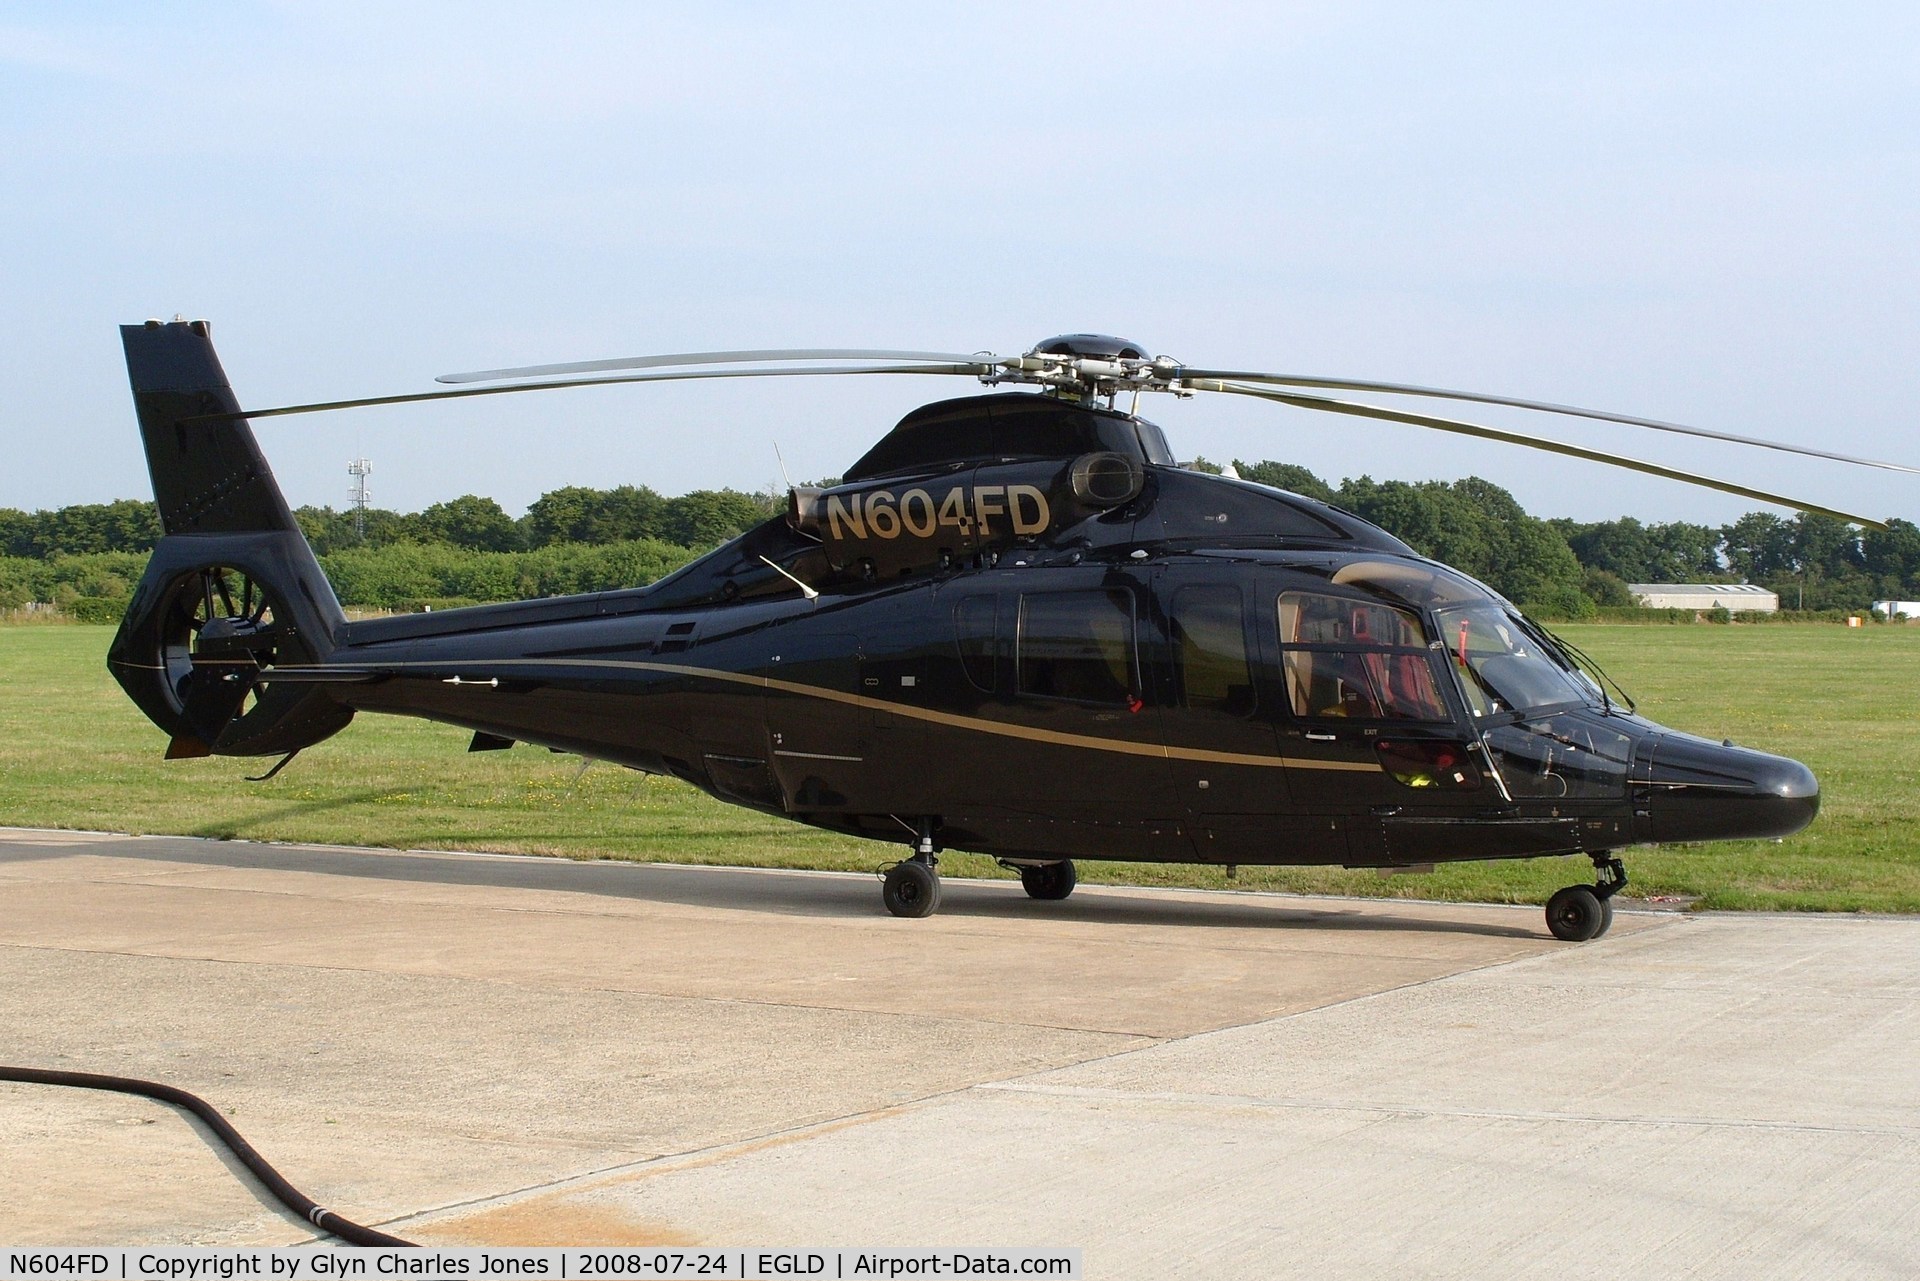 N604FD, 2000 Eurocopter EC-155B C/N 6580, Previously F-WQDS and N111WR. Owned by Wells Fargo Bank Northwest Na Trustee.